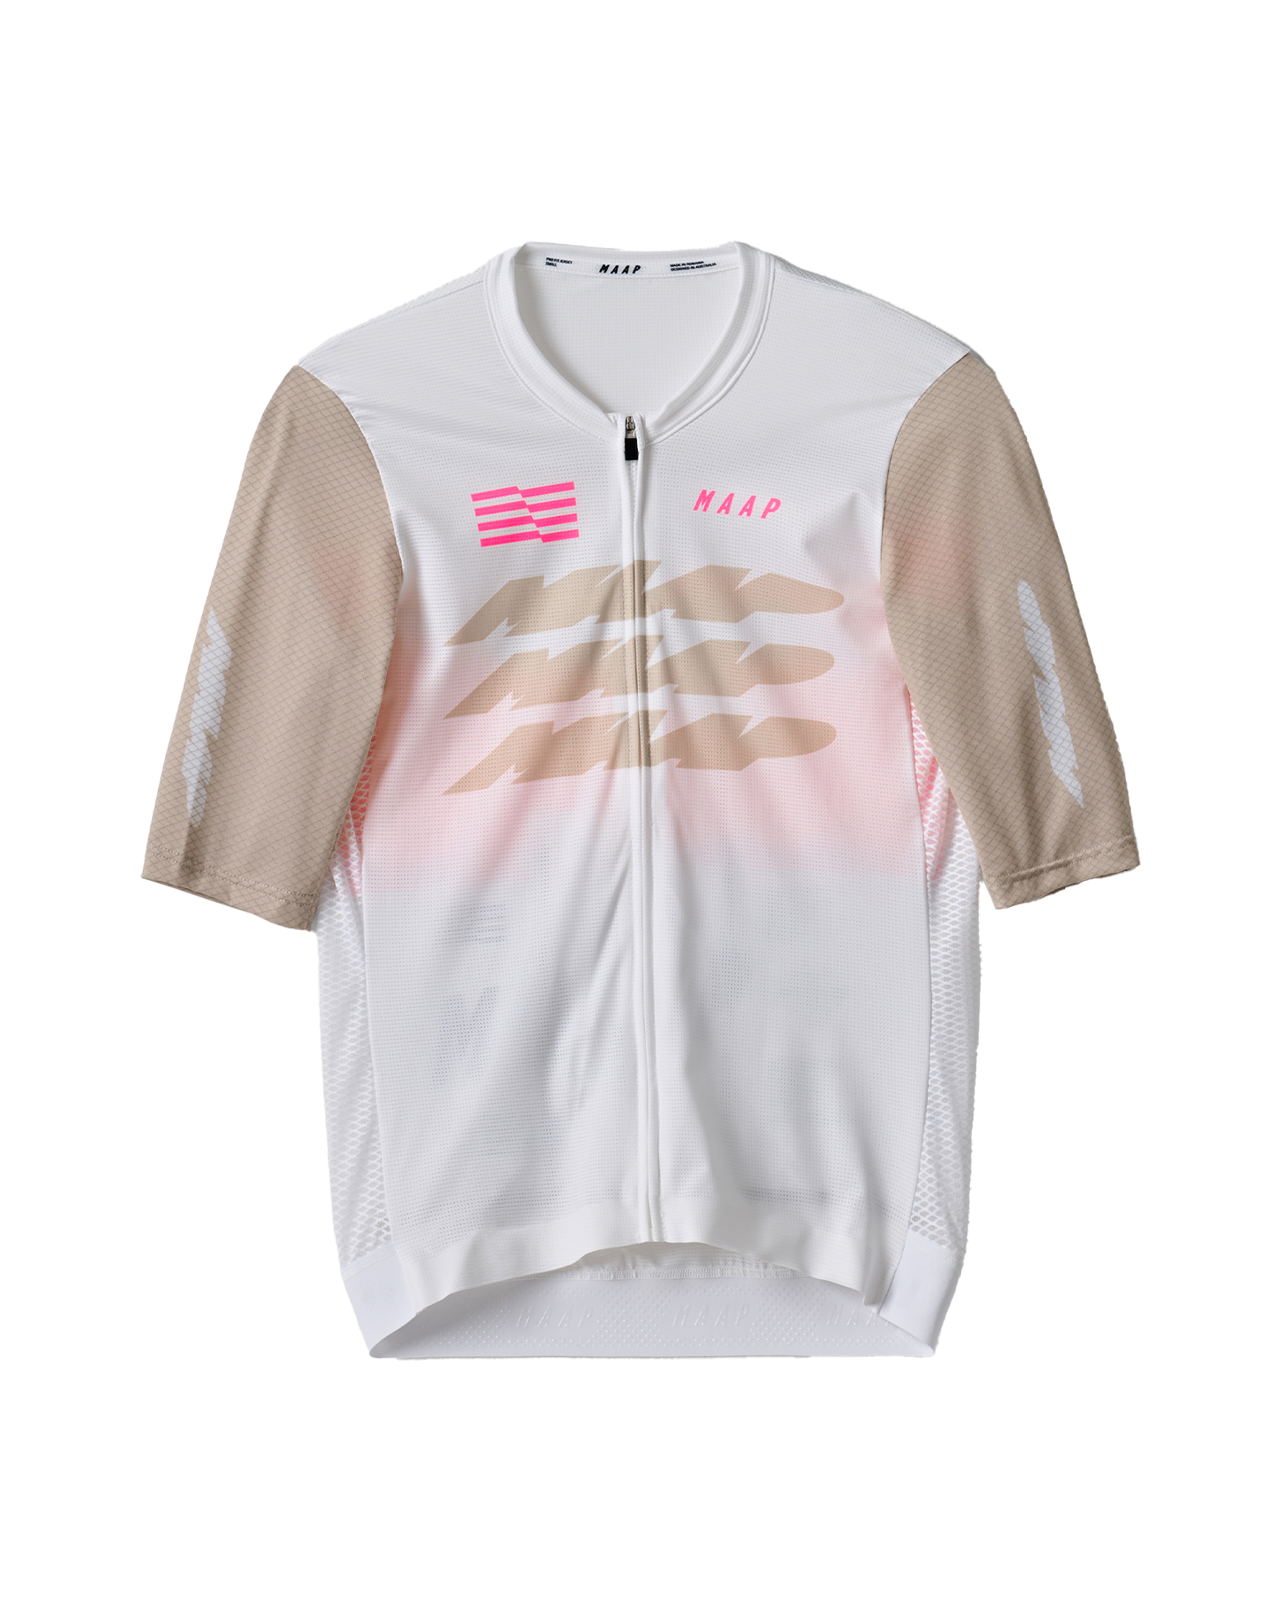 Eclipse Pro Air Jersey 2.0 - White